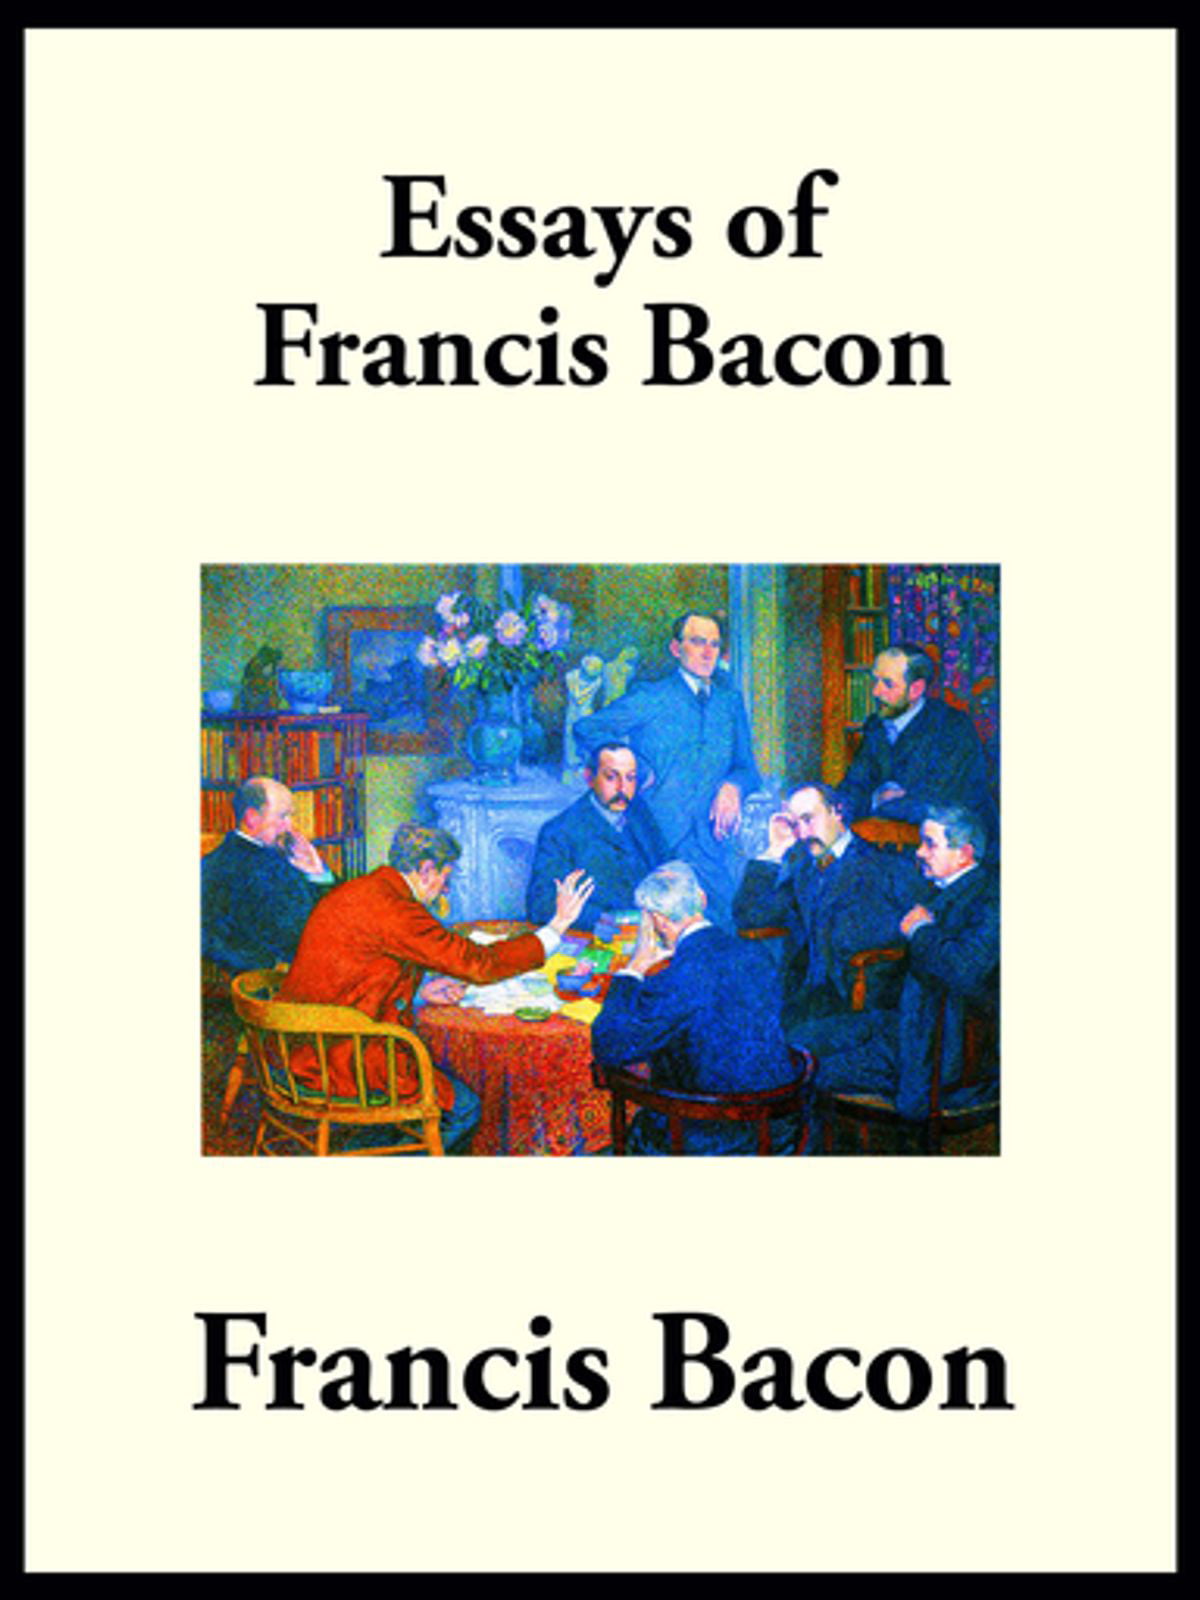 one example of essay written by francis bacon